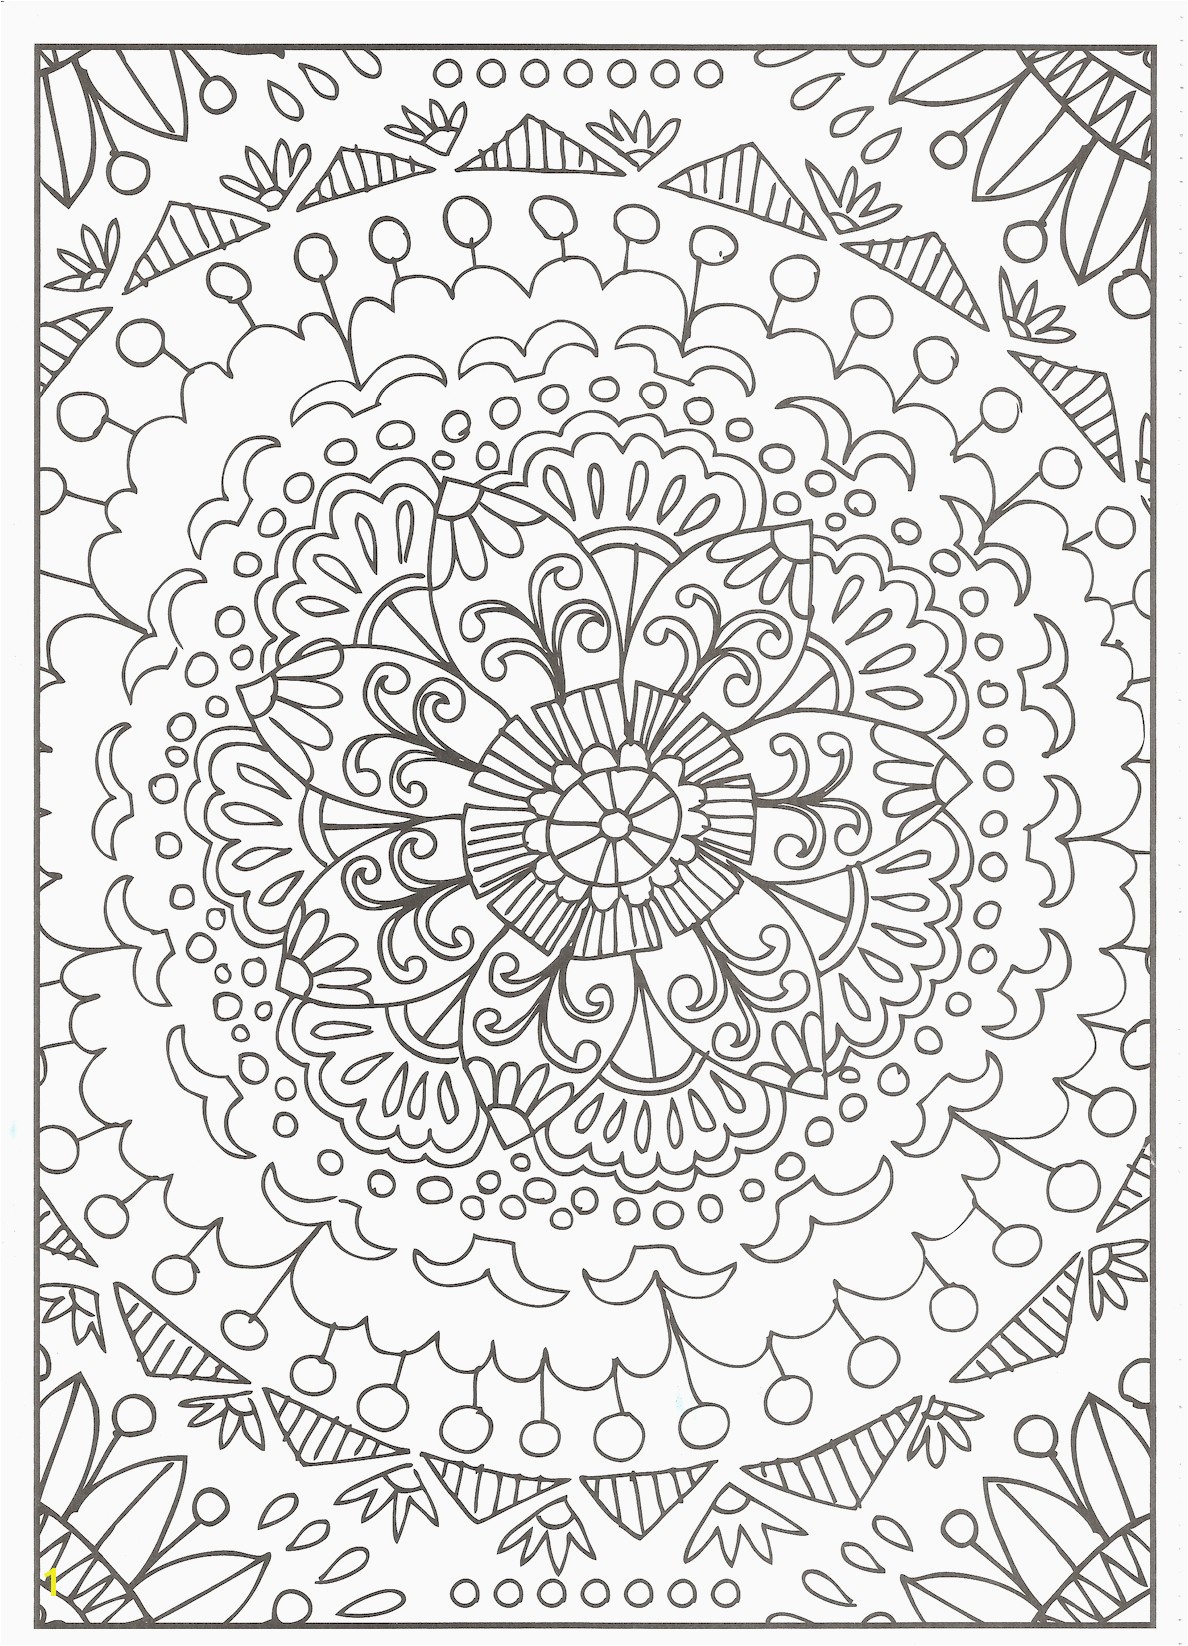 Flowers Printable Coloring Pages Free Printable Flower Coloring Pages for Adults Inspirational Cool